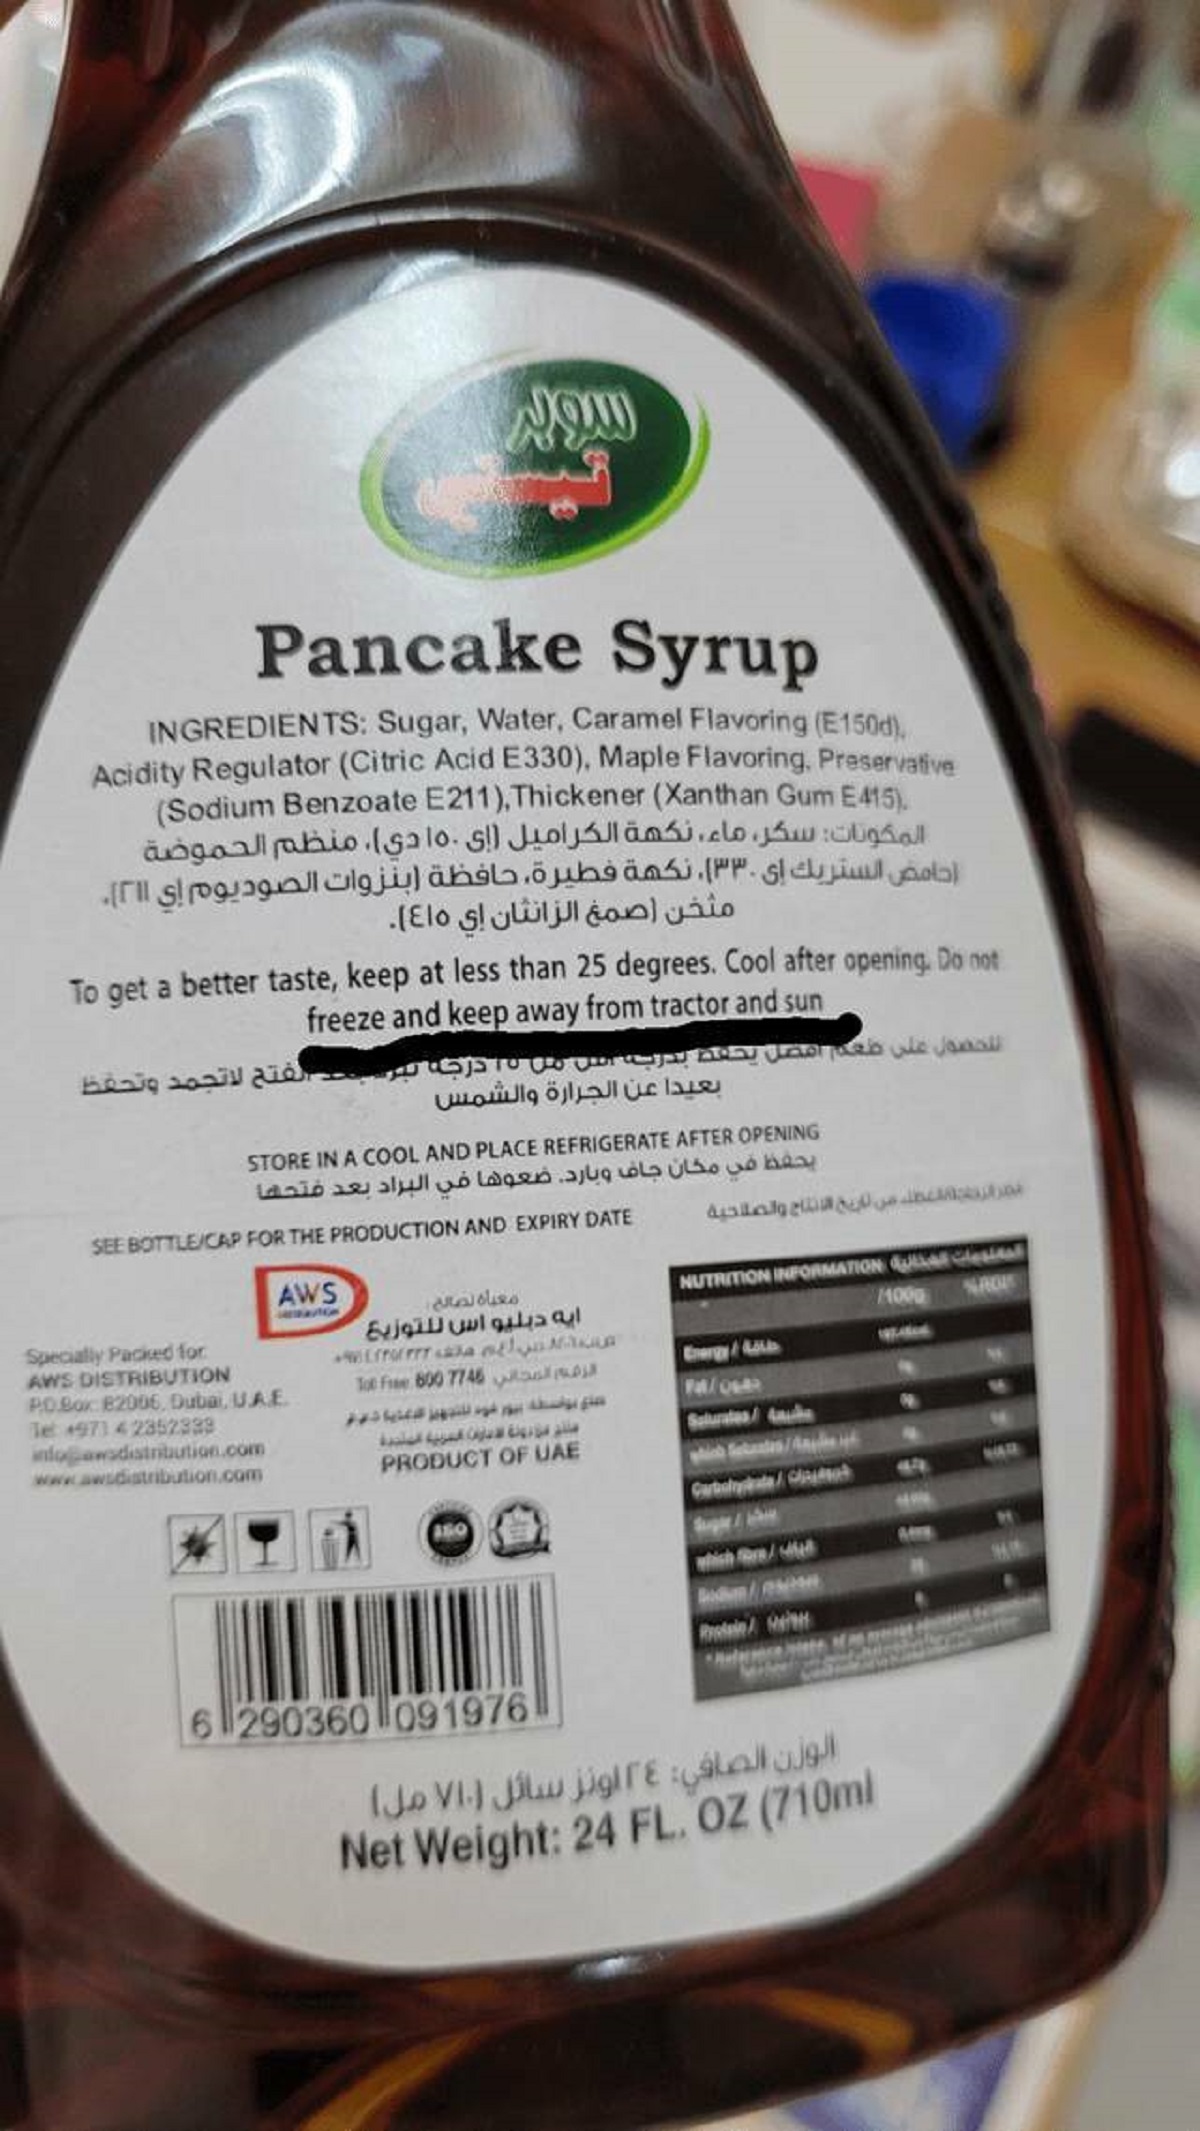 "The pancake syrup I bought has "keep away from tractor" printed on it..."